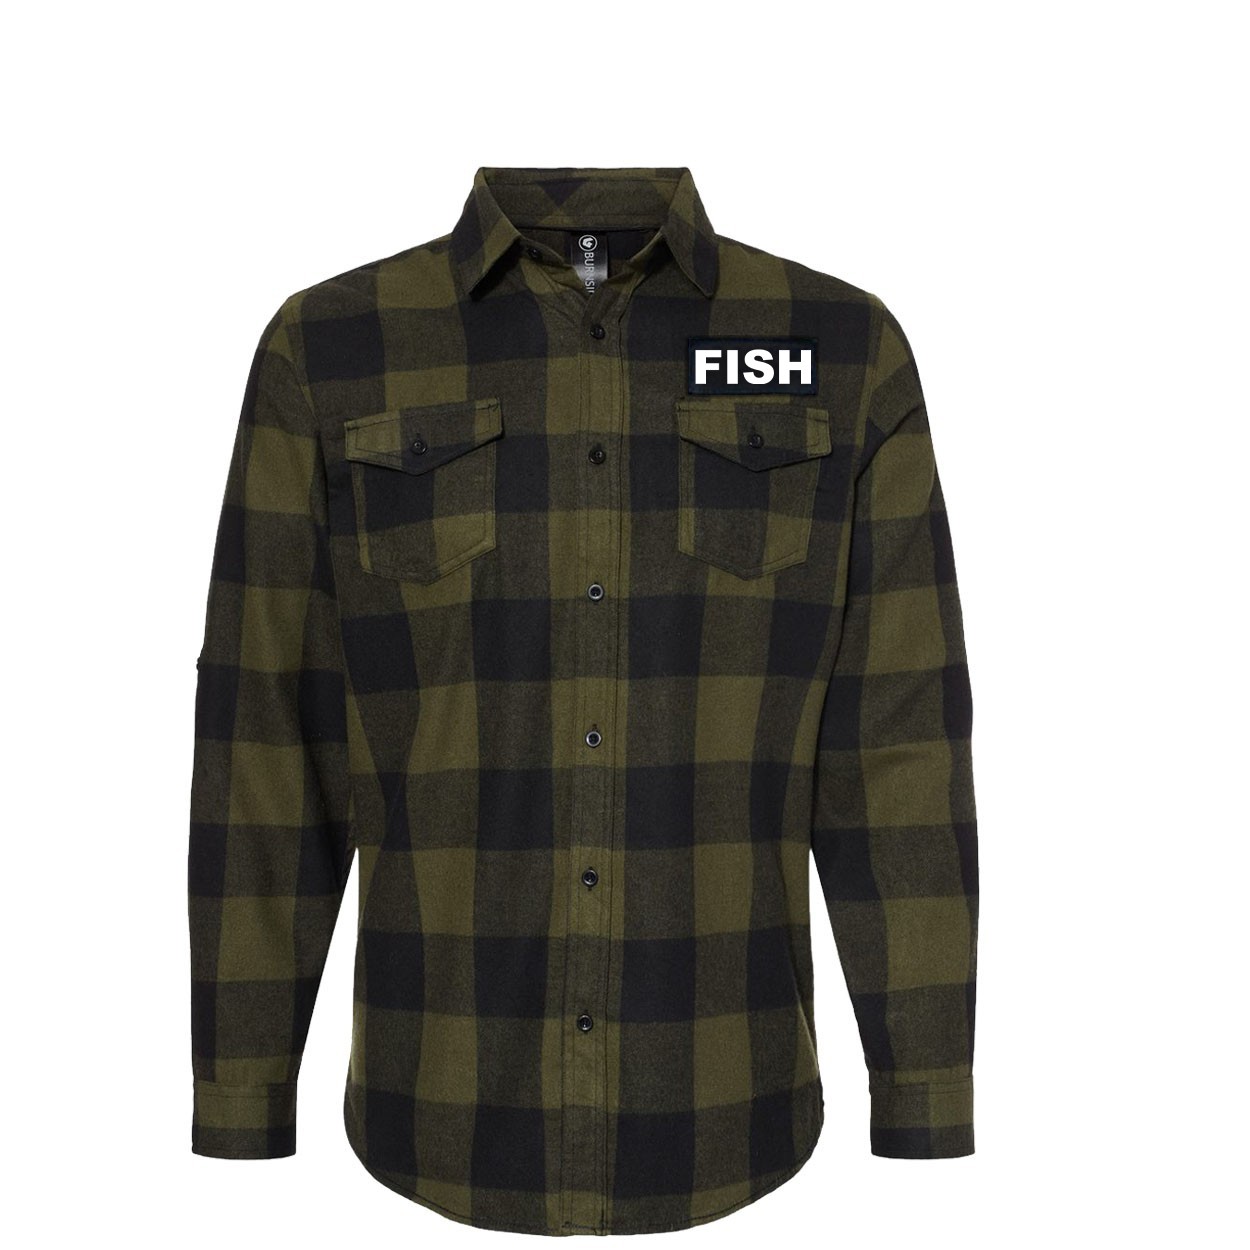 Fish Brand Logo Classic Unisex Long Sleeve Woven Patch Flannel Shirt Army/Black (White Logo)